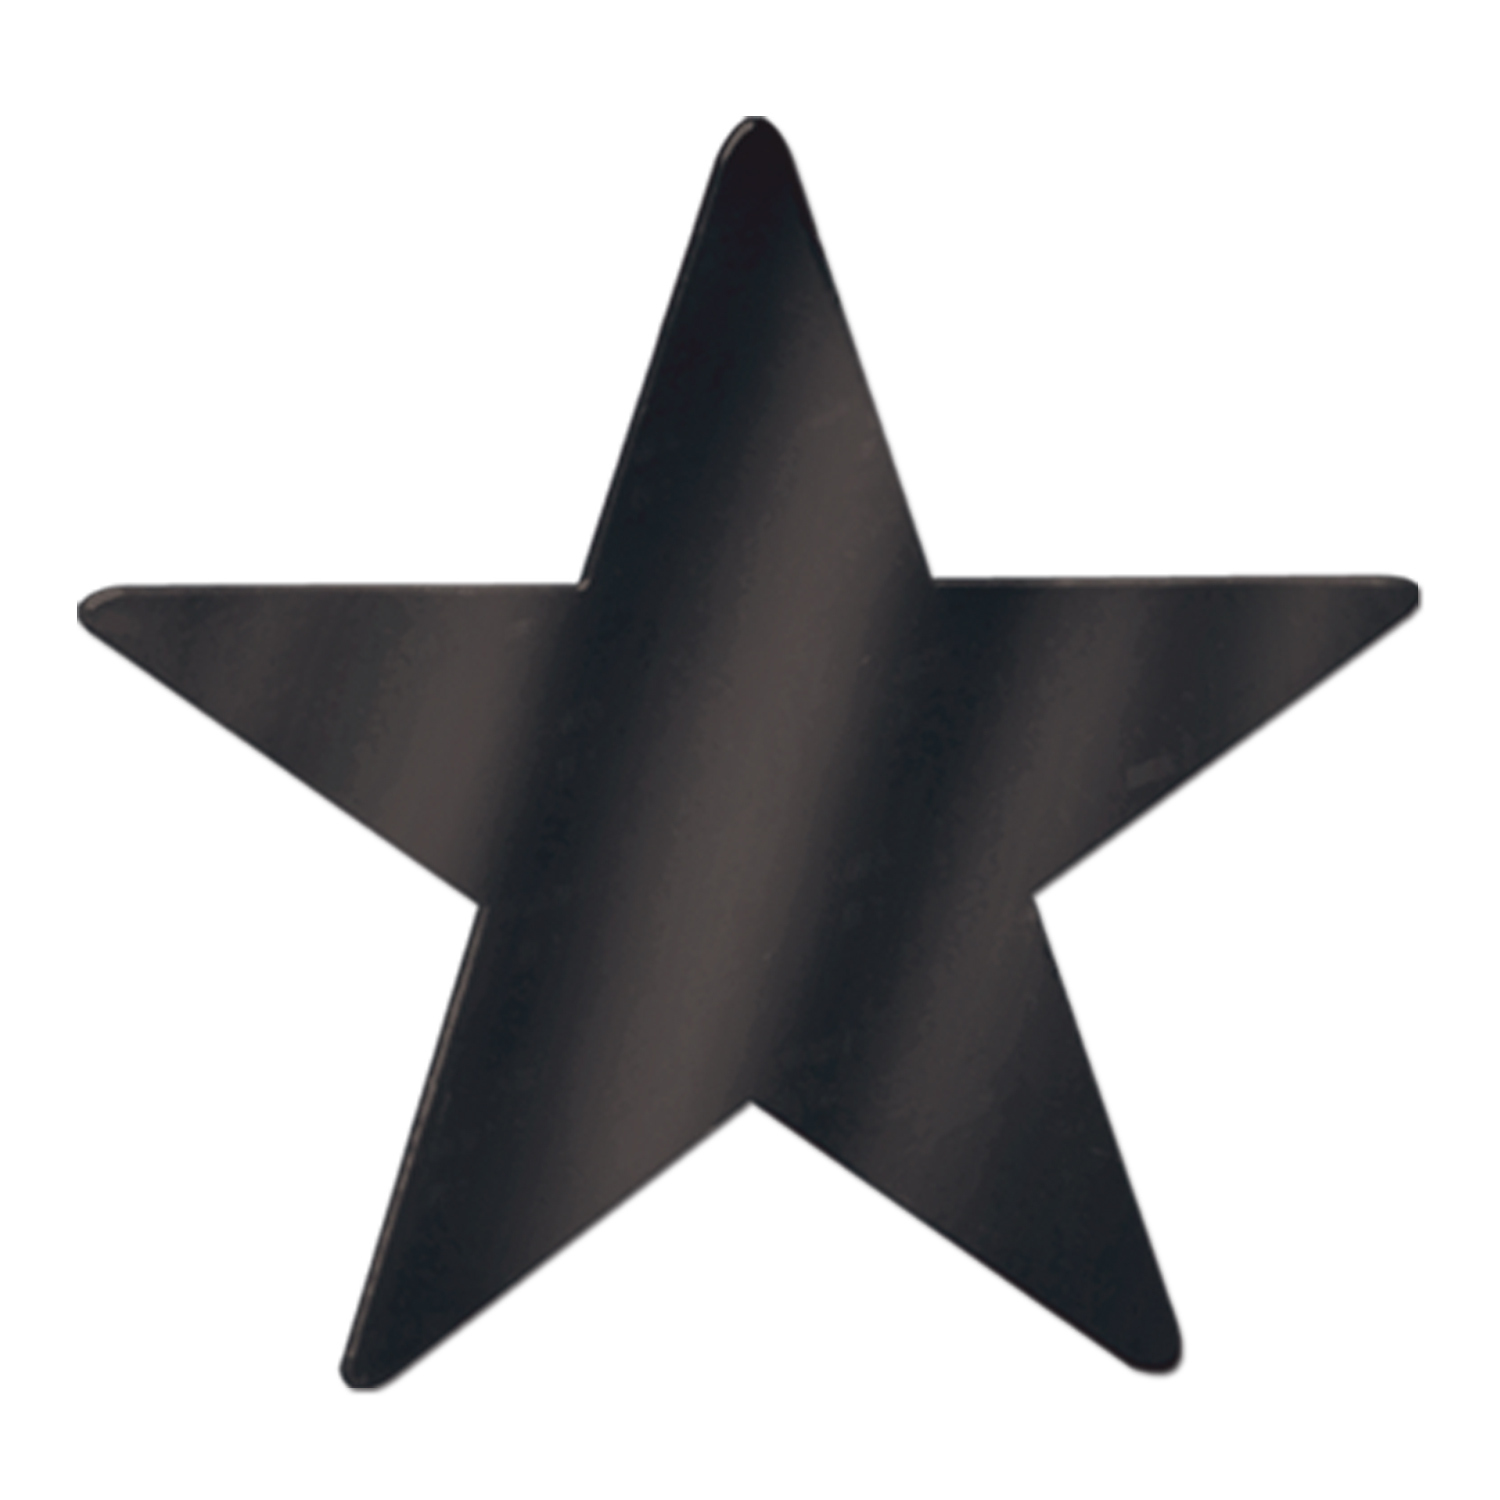 Star cutout decoration printed black on card stock material.